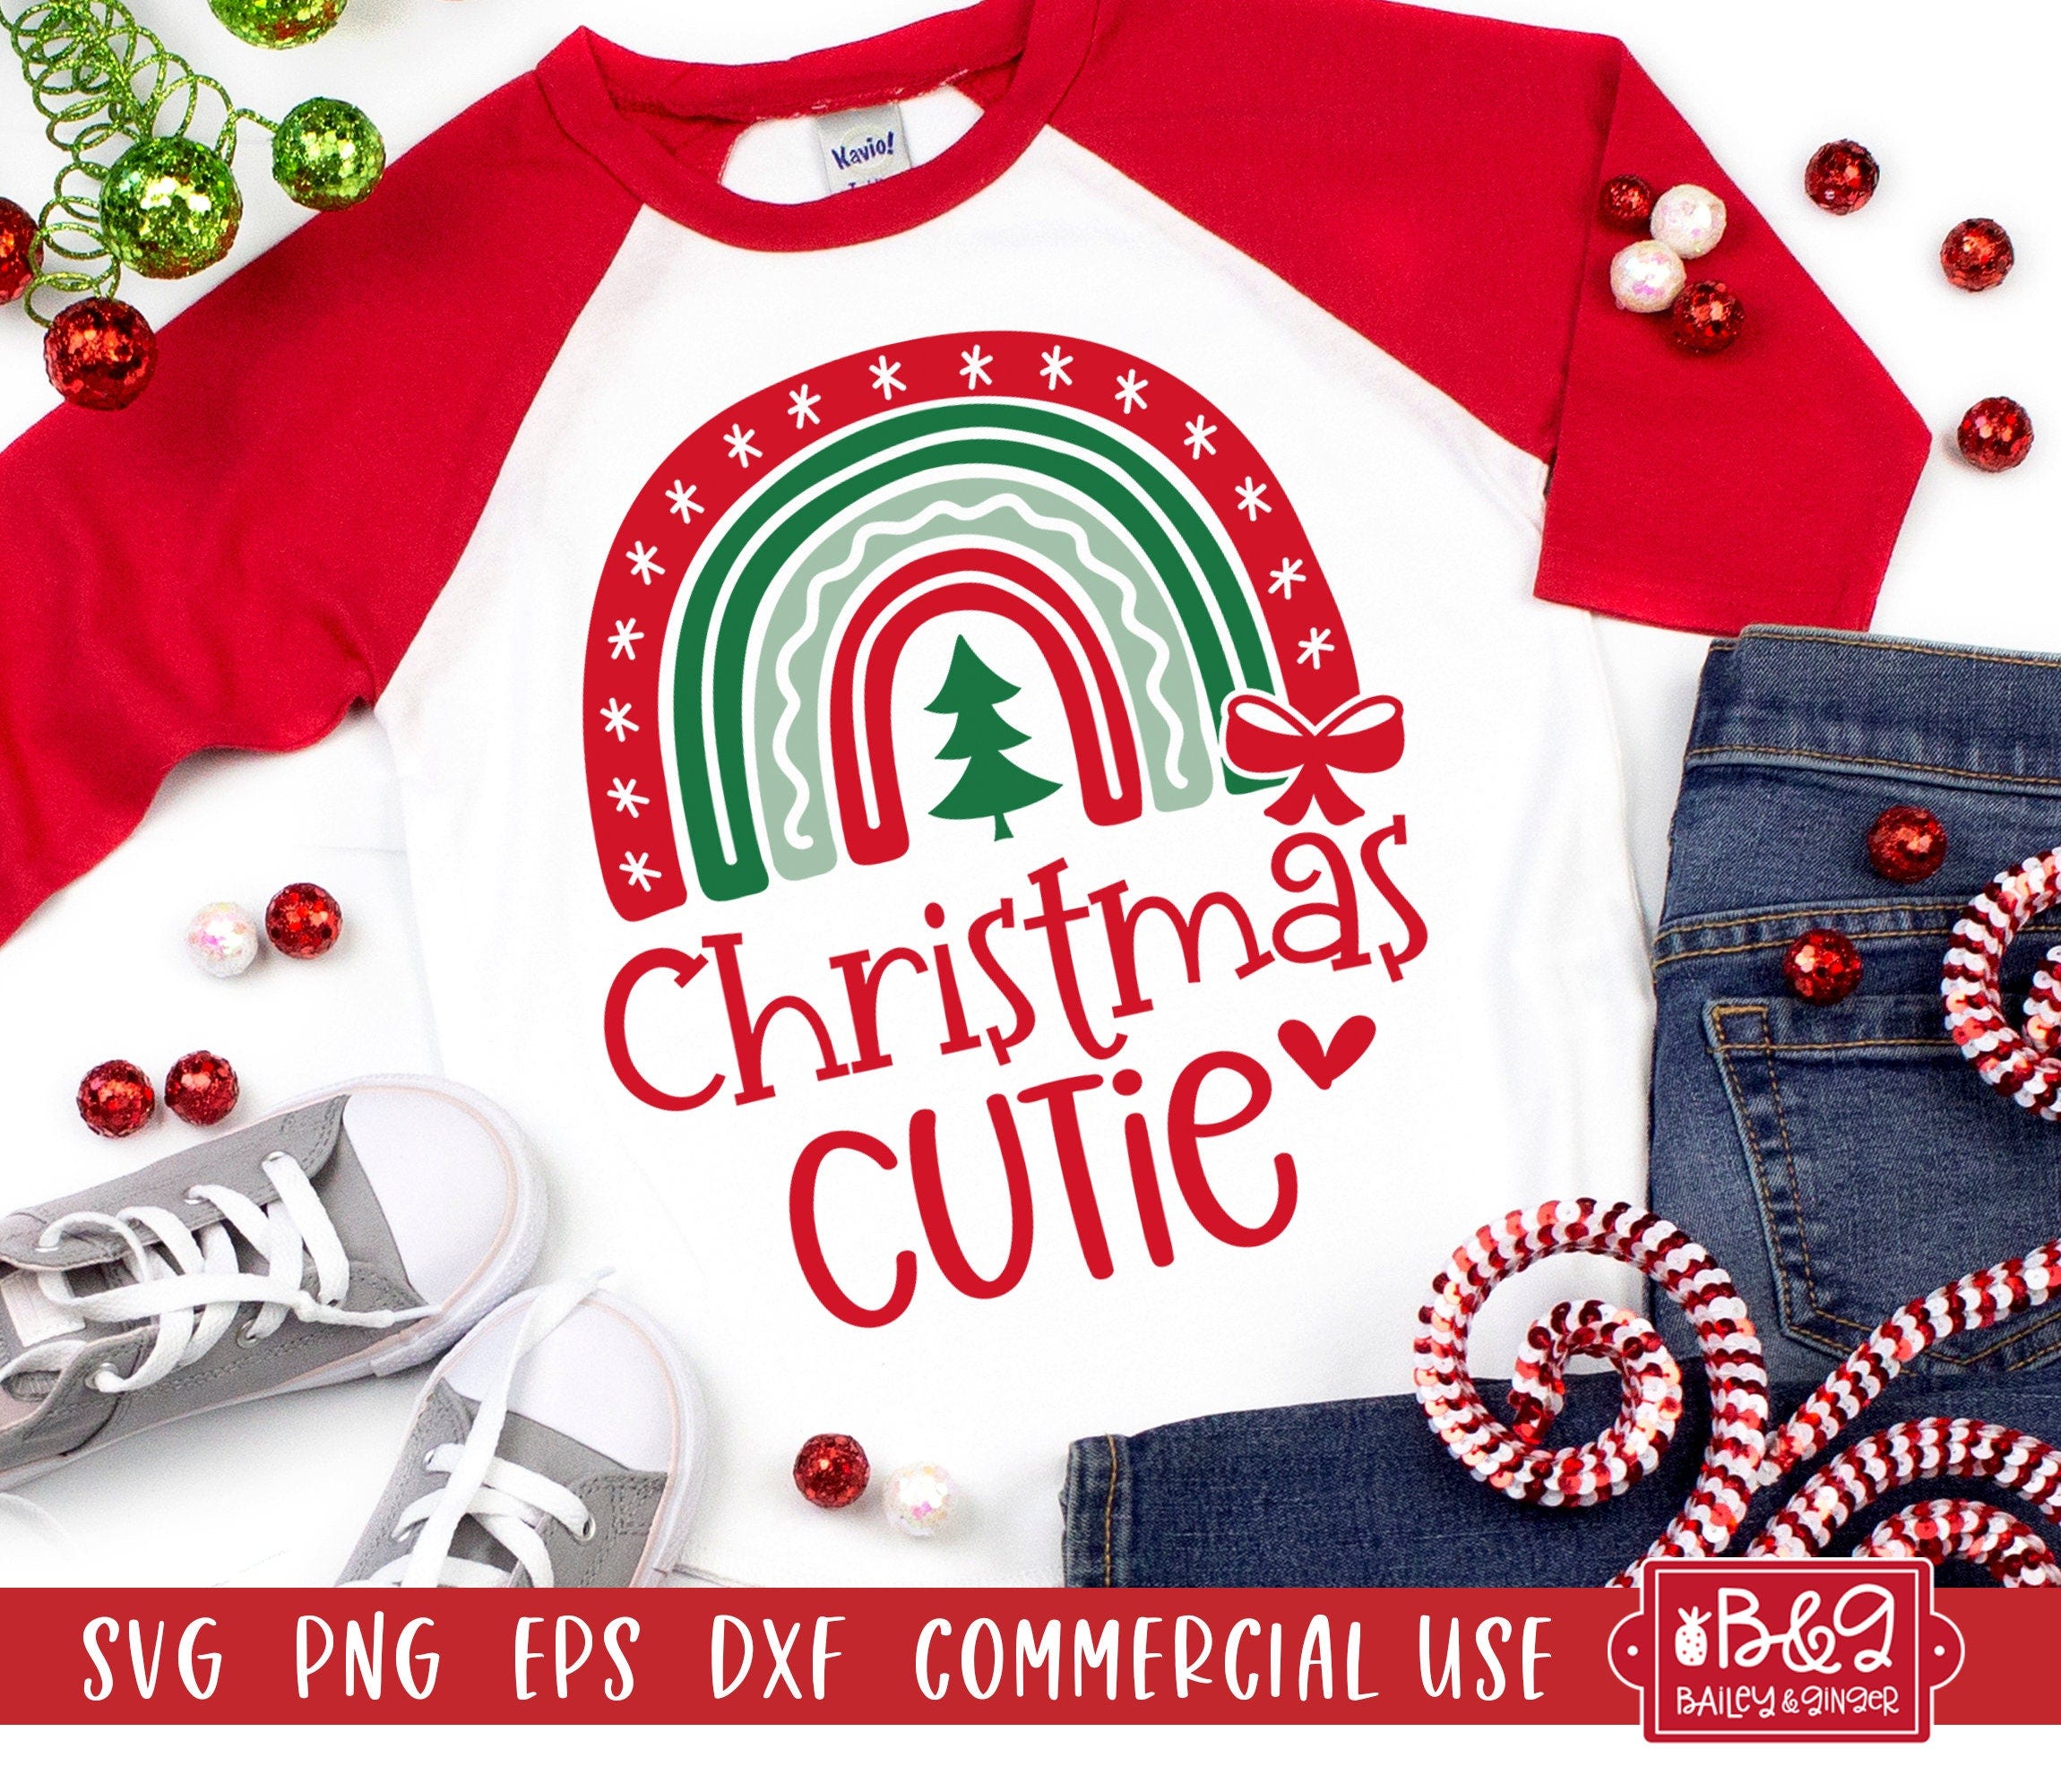 Christmas Rainbow SVG Cut File - Christmas Cutie Kids Shirt SVG Cut File, Commercial Use Cut Files for Cricut or Silhouette, For Vinyl